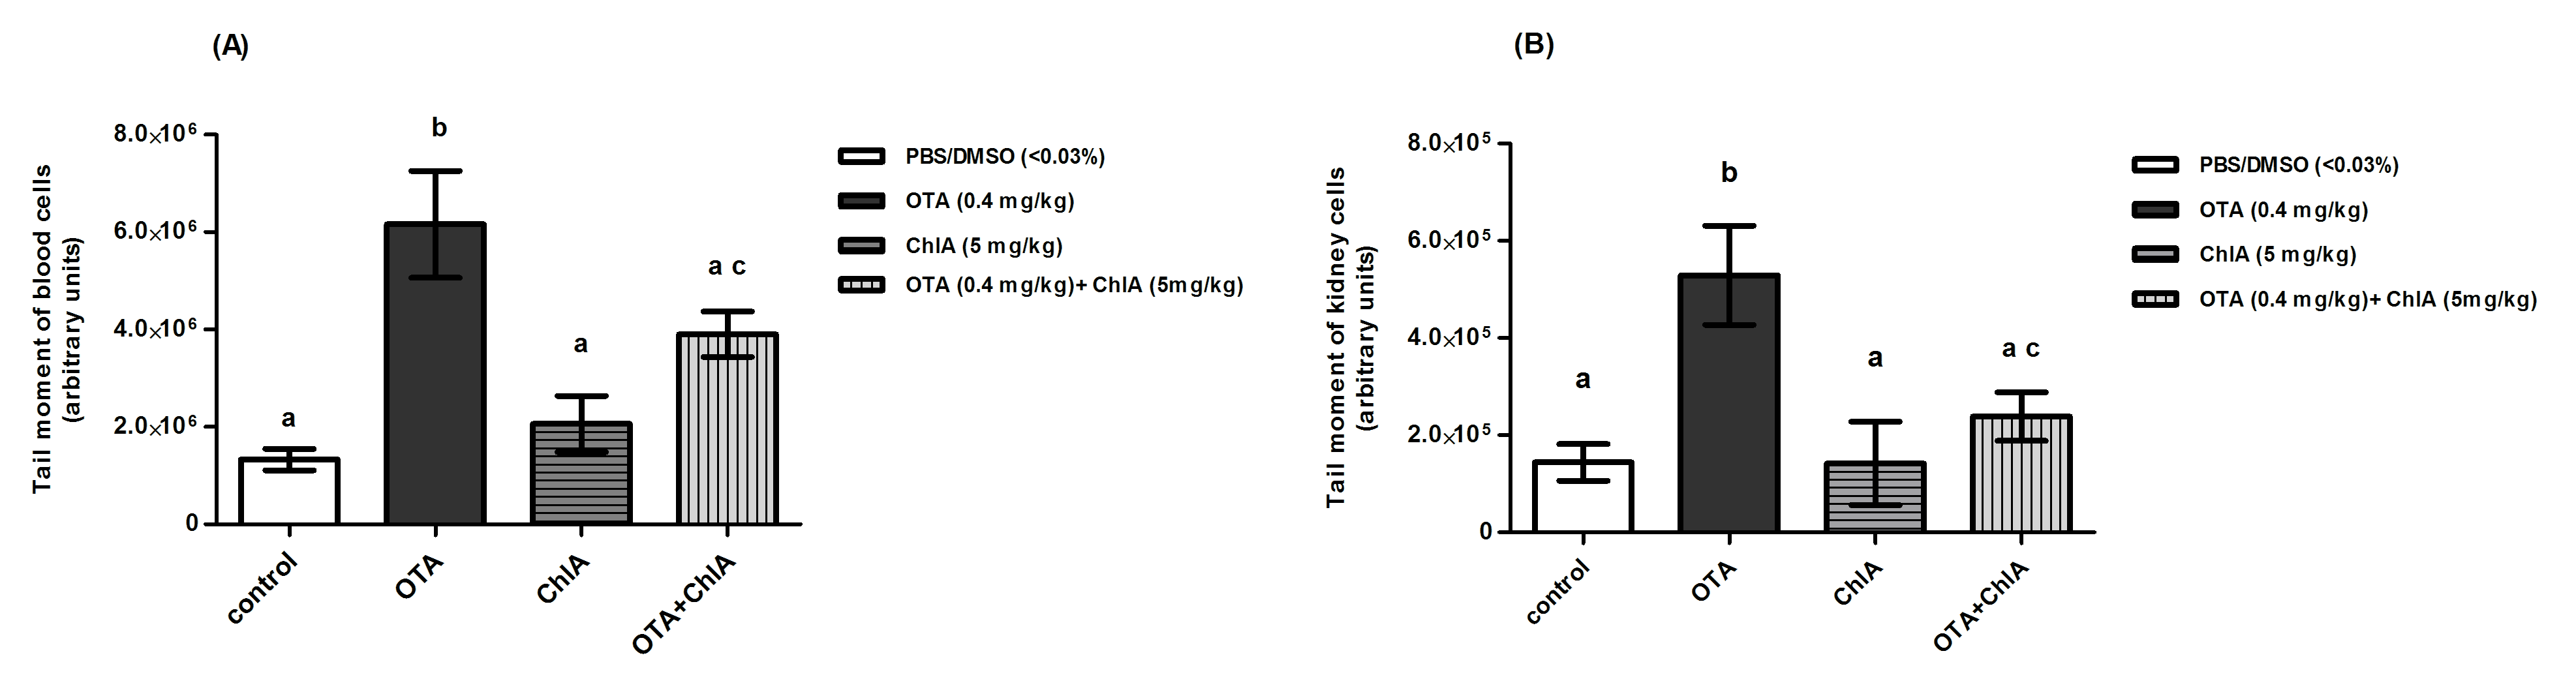 Protective effects of chlorogenic acid (ChlA)
  on ochratoxin A (OTA)-induced DNA damage (tail moment) measured by comet
  assay.